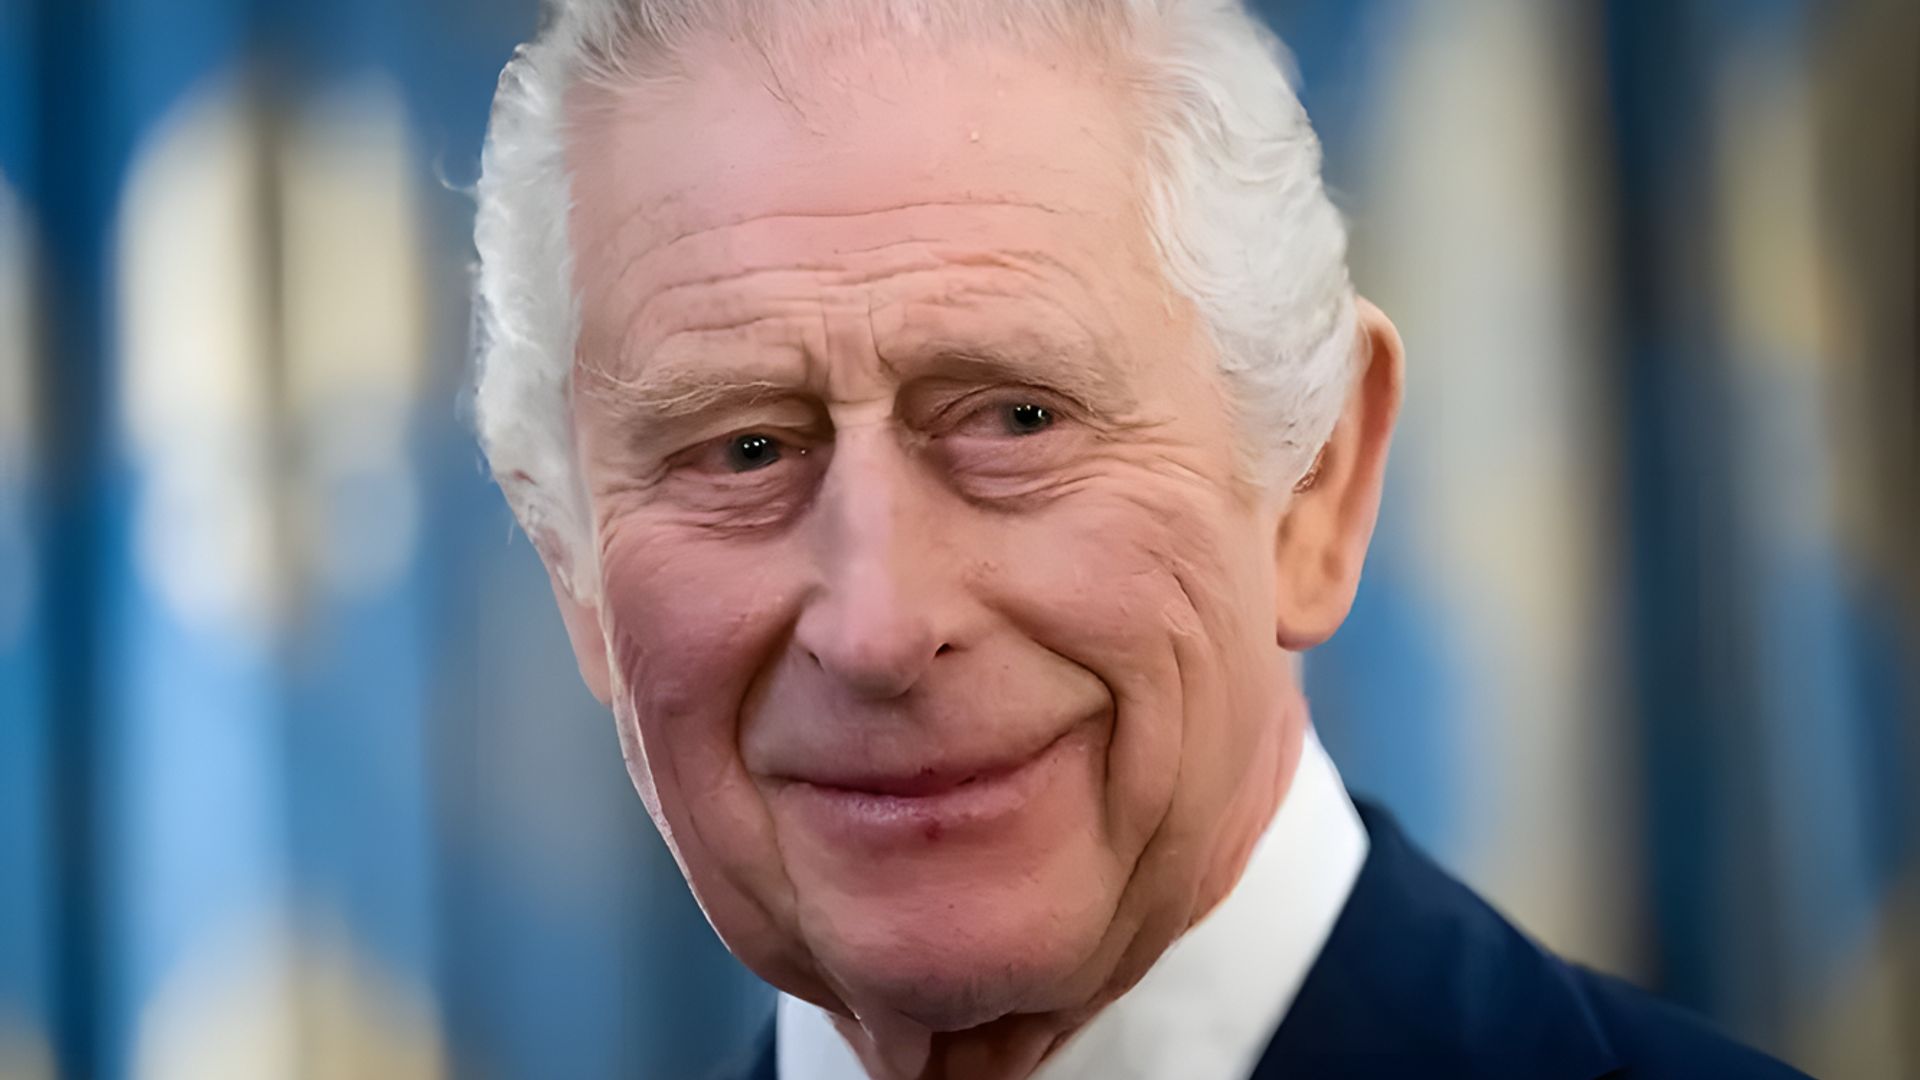 Charles III decided not to hide his diagnosis